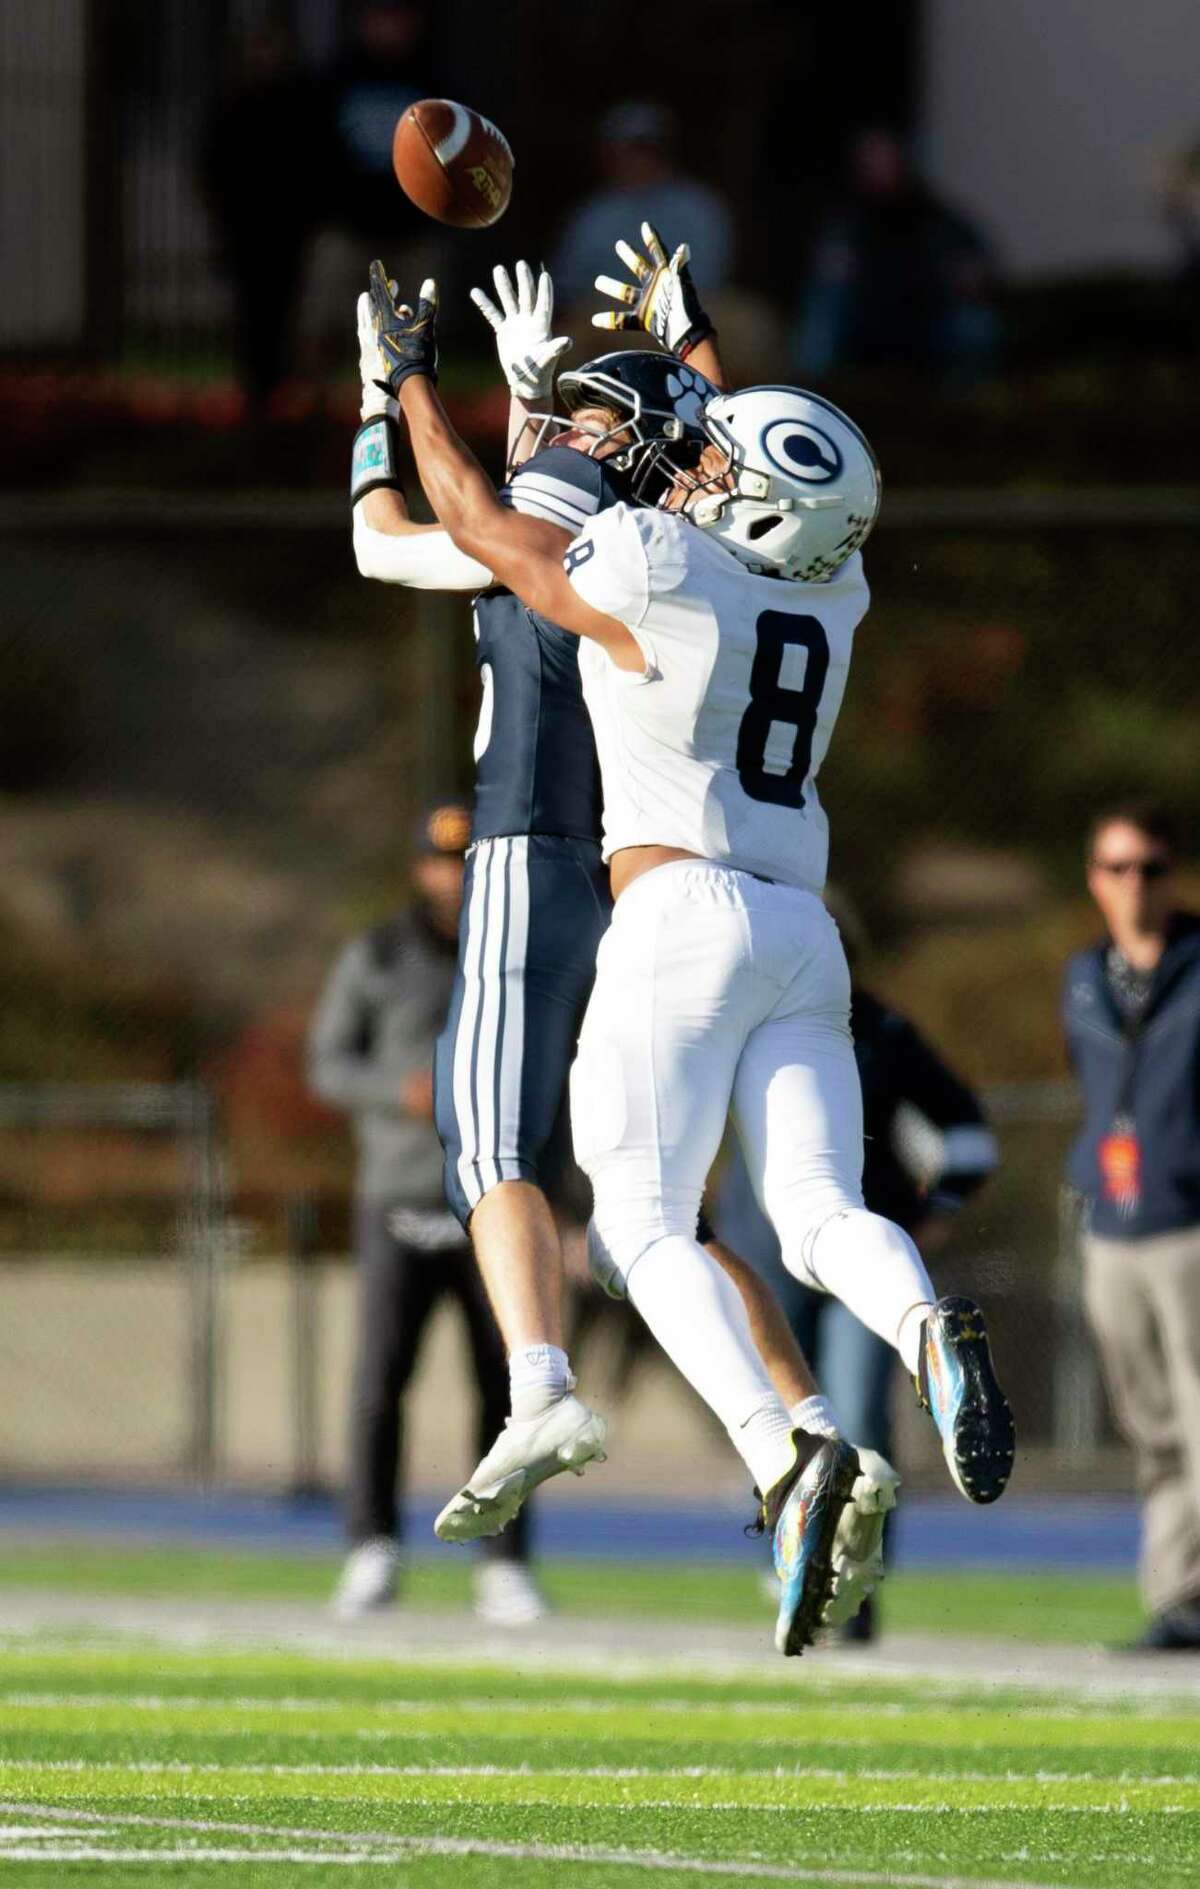 Marin Catholic defensive back Charlie Knapp, left, beats Central Valley Christian tight end Jaeden Moore (8) to the ball for an interception during the third quarter of a CIF Division 4-AA high school football championship game on Saturday, Dec. 11, 2021 in Kentfield, Calif.